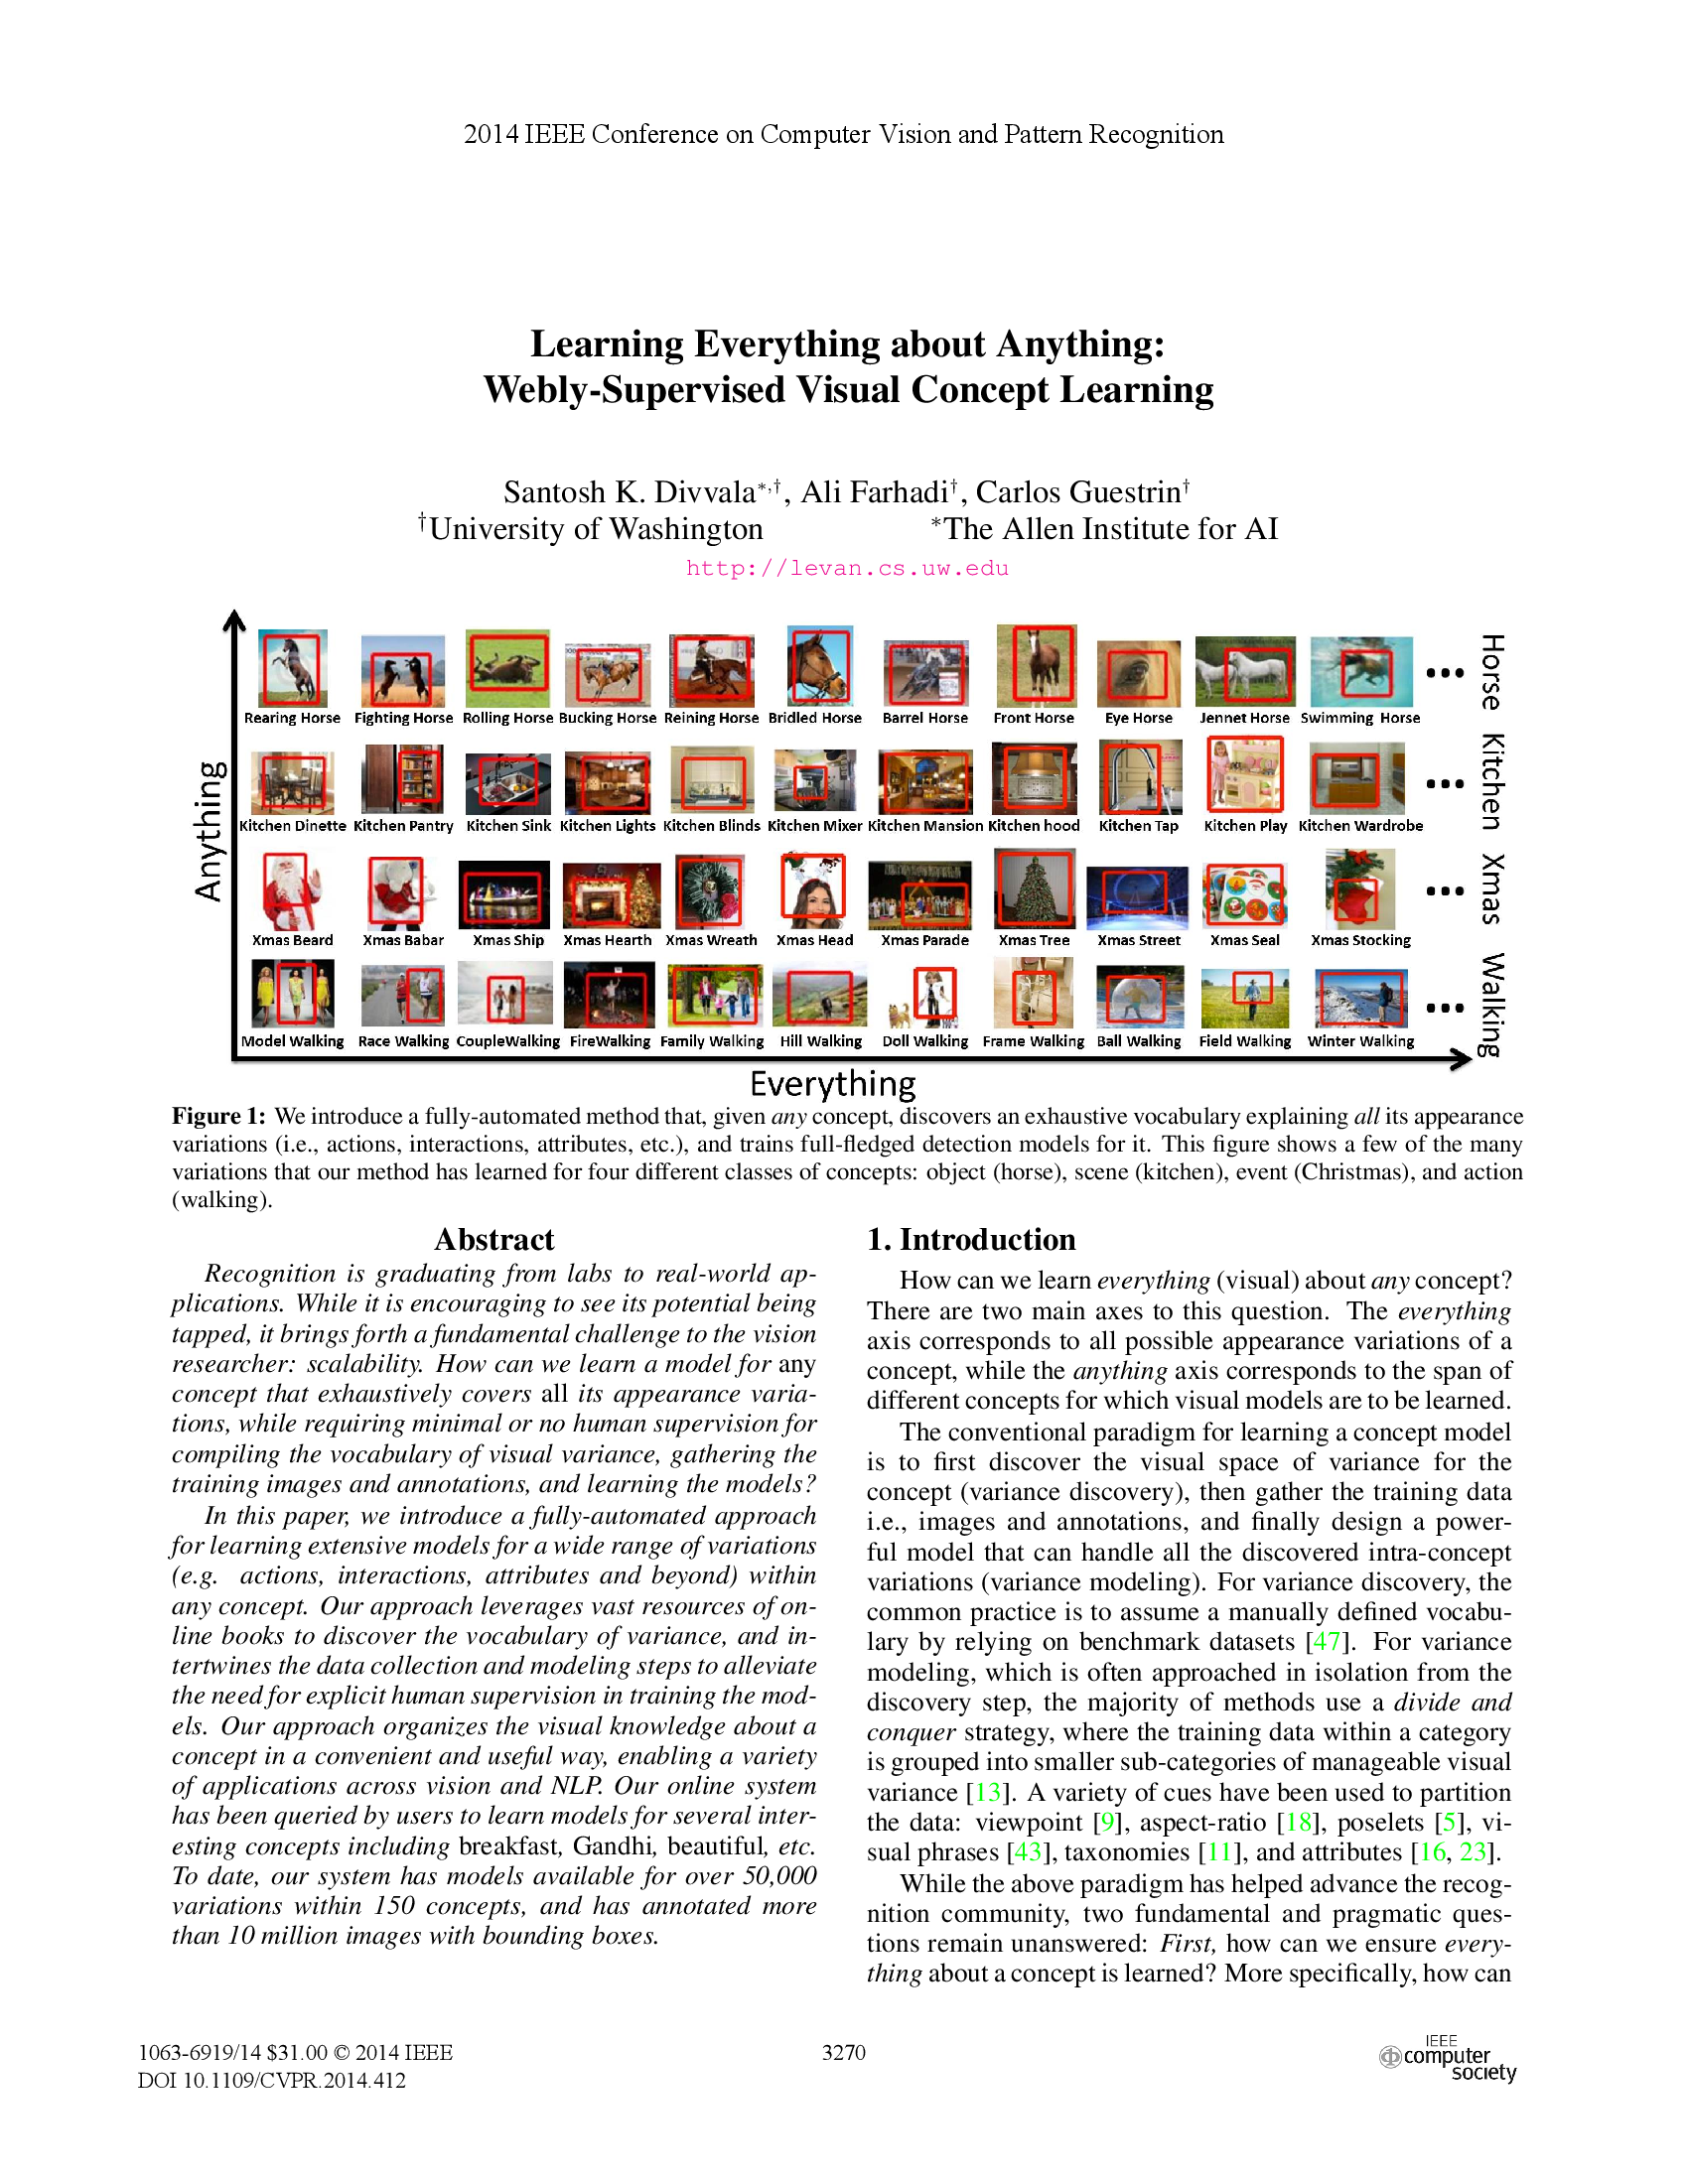 Learning Everything about Anything: Webly-Supervised Visual Concept Learning